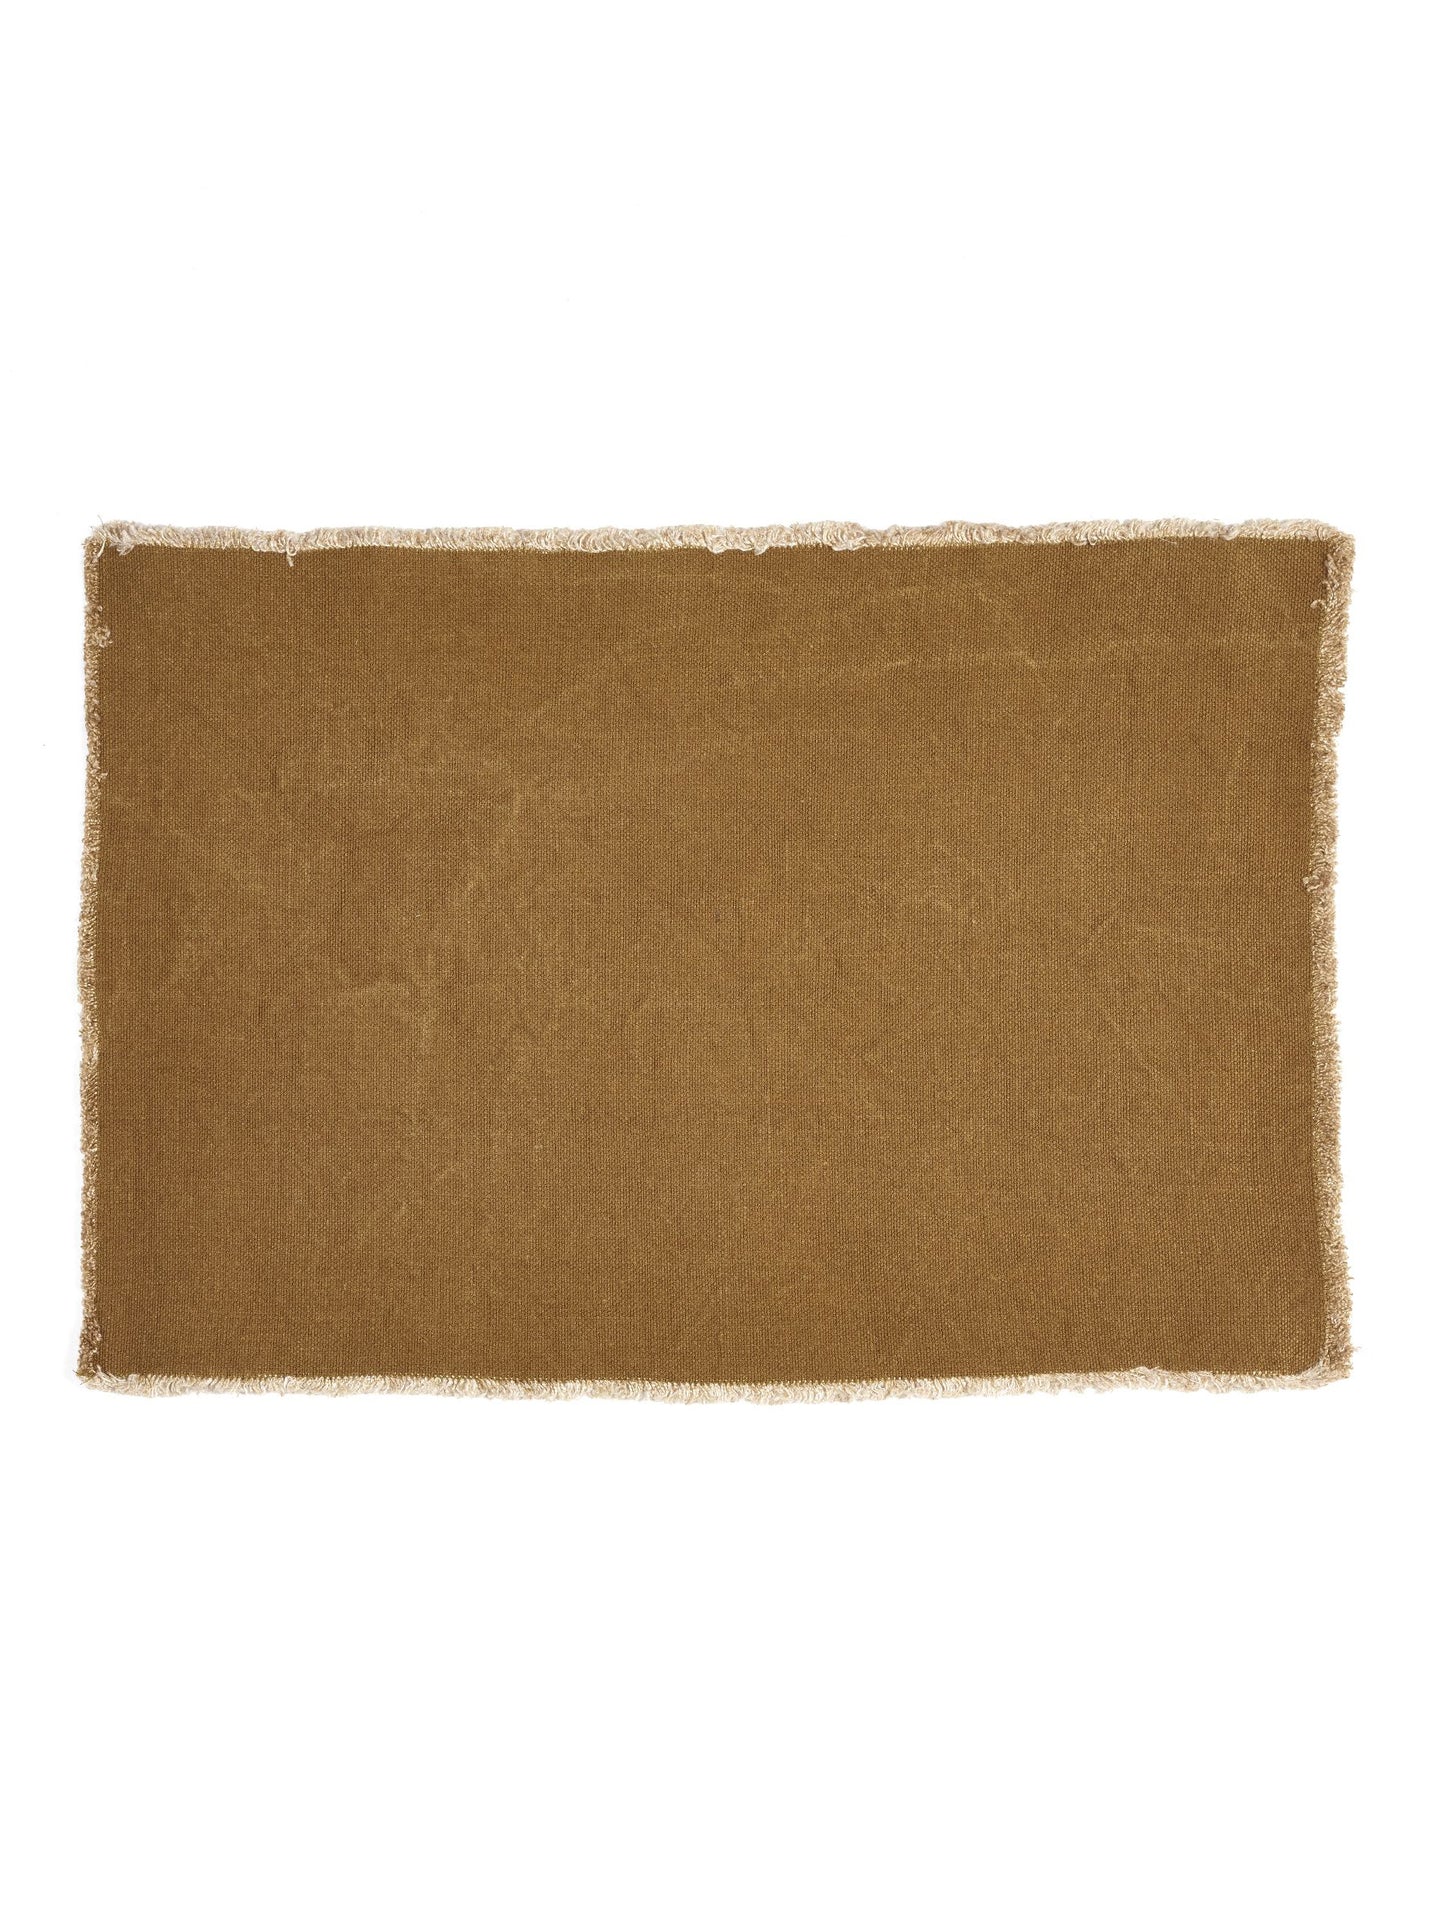 Libeco Pacific Linen Curry Placemats